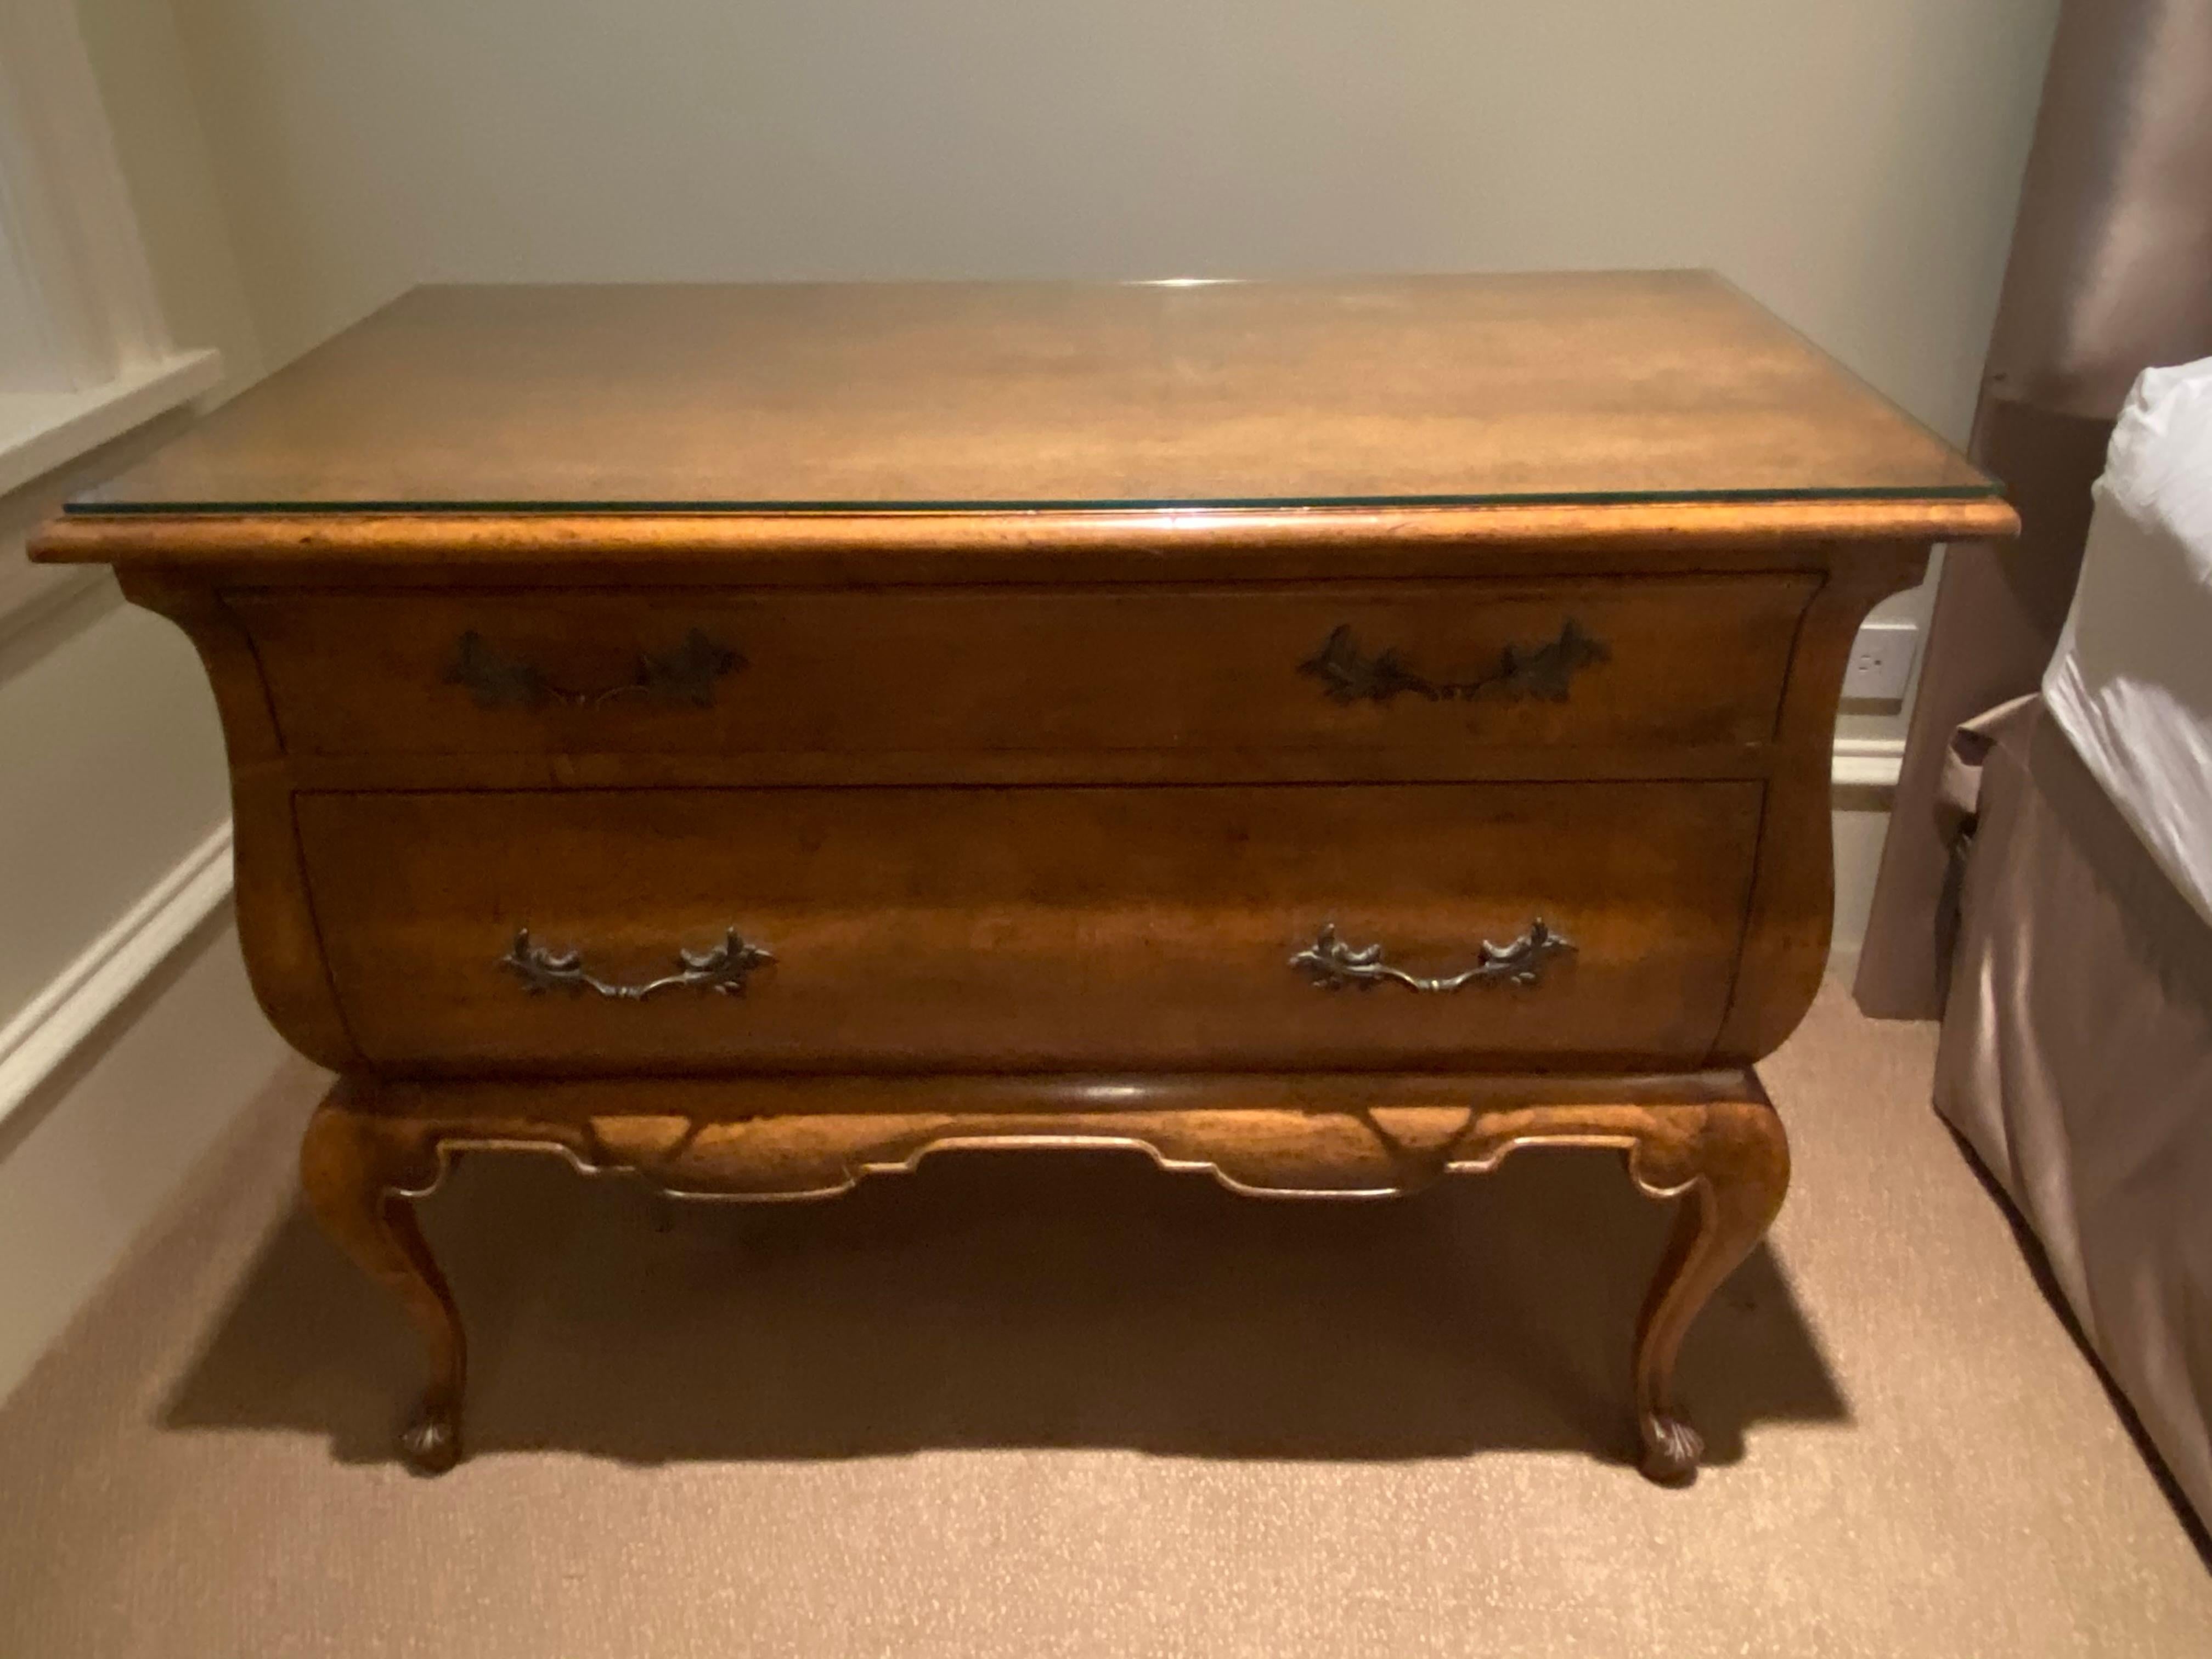 Minton-Spidell Dutch Bombe Chest or Nightstand / 2 available 
Beautifully turned out legs, elegant hardware, honey stained walnut
glass top has protected this piece, and the beautiful blue grosgrain lined drawers make this a special side table,